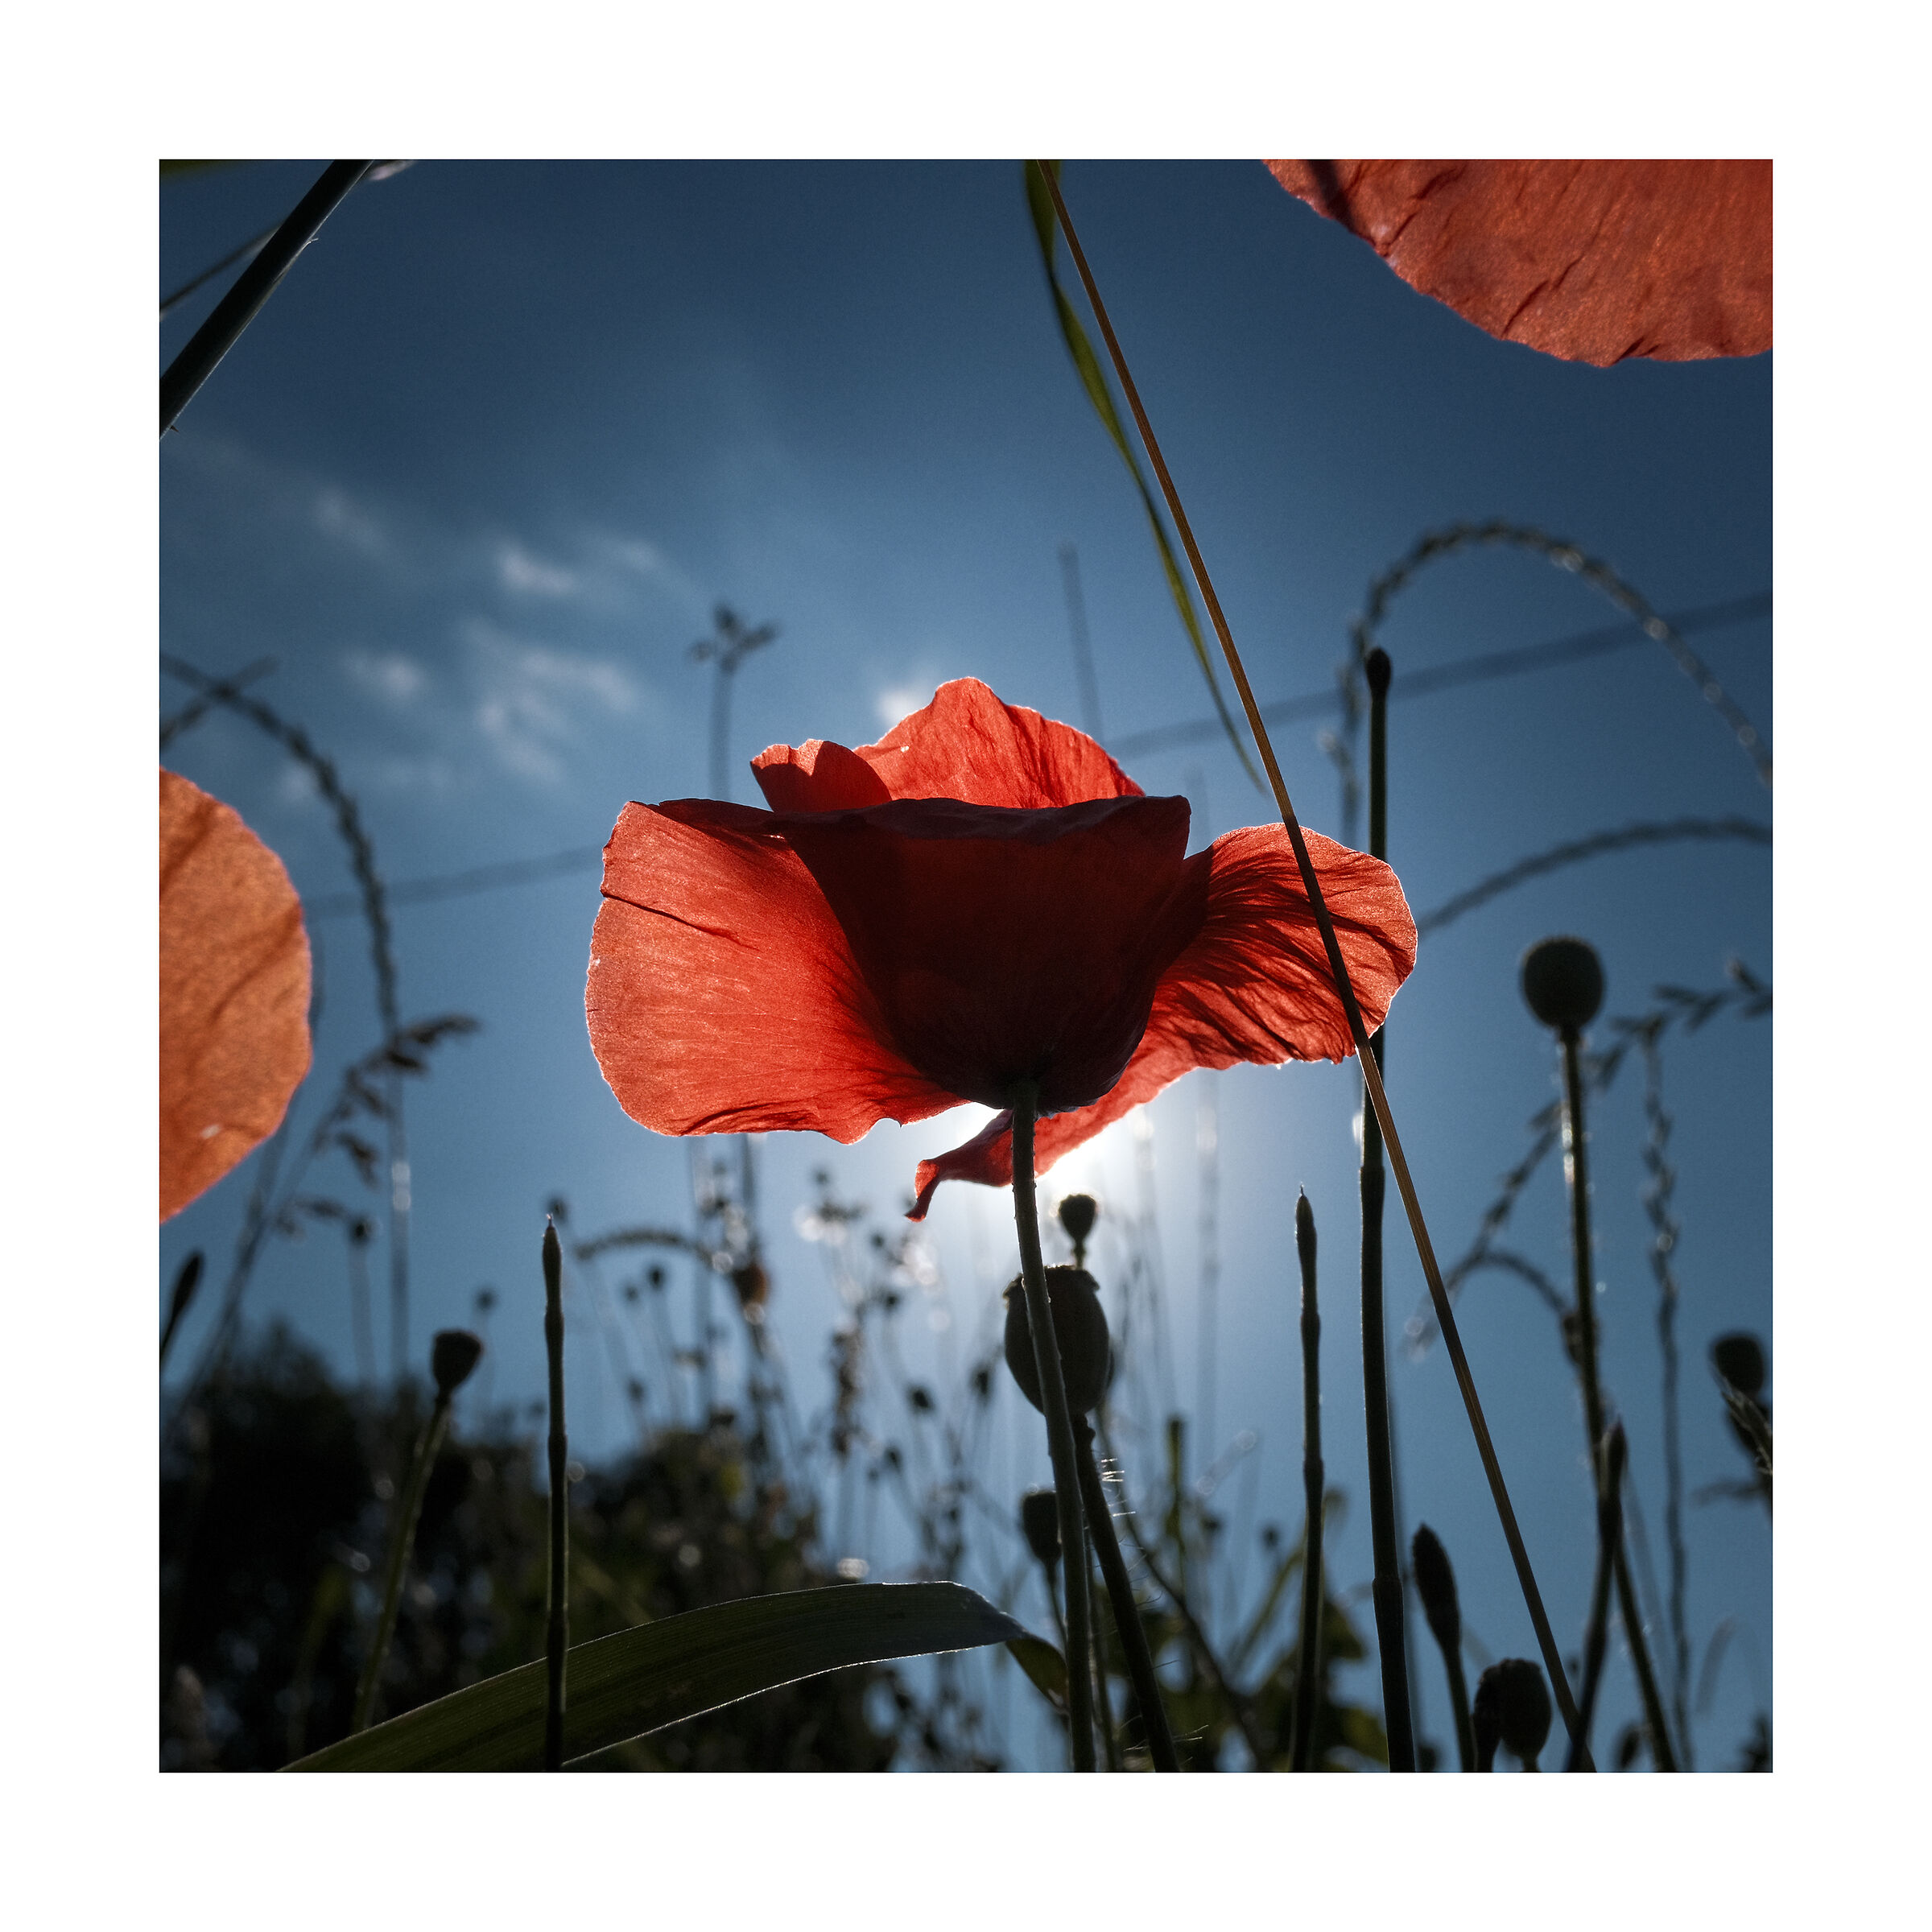 poppies in backlight ......